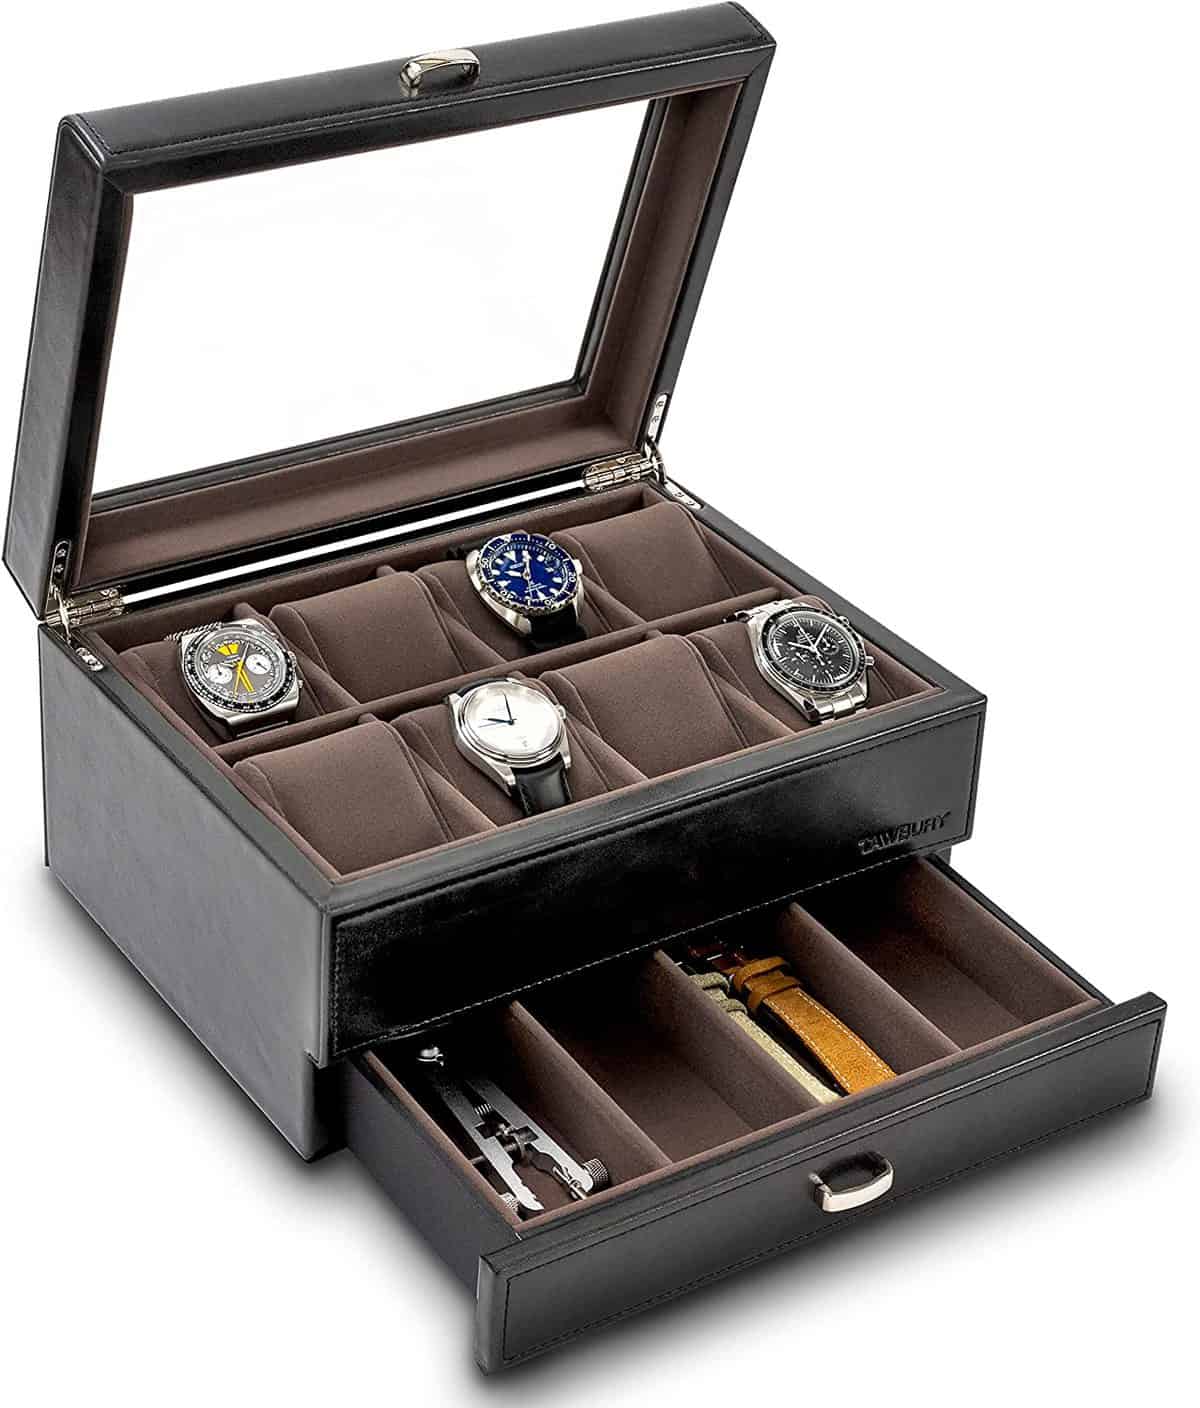 Tawbury 8 Watch Case With Drawer